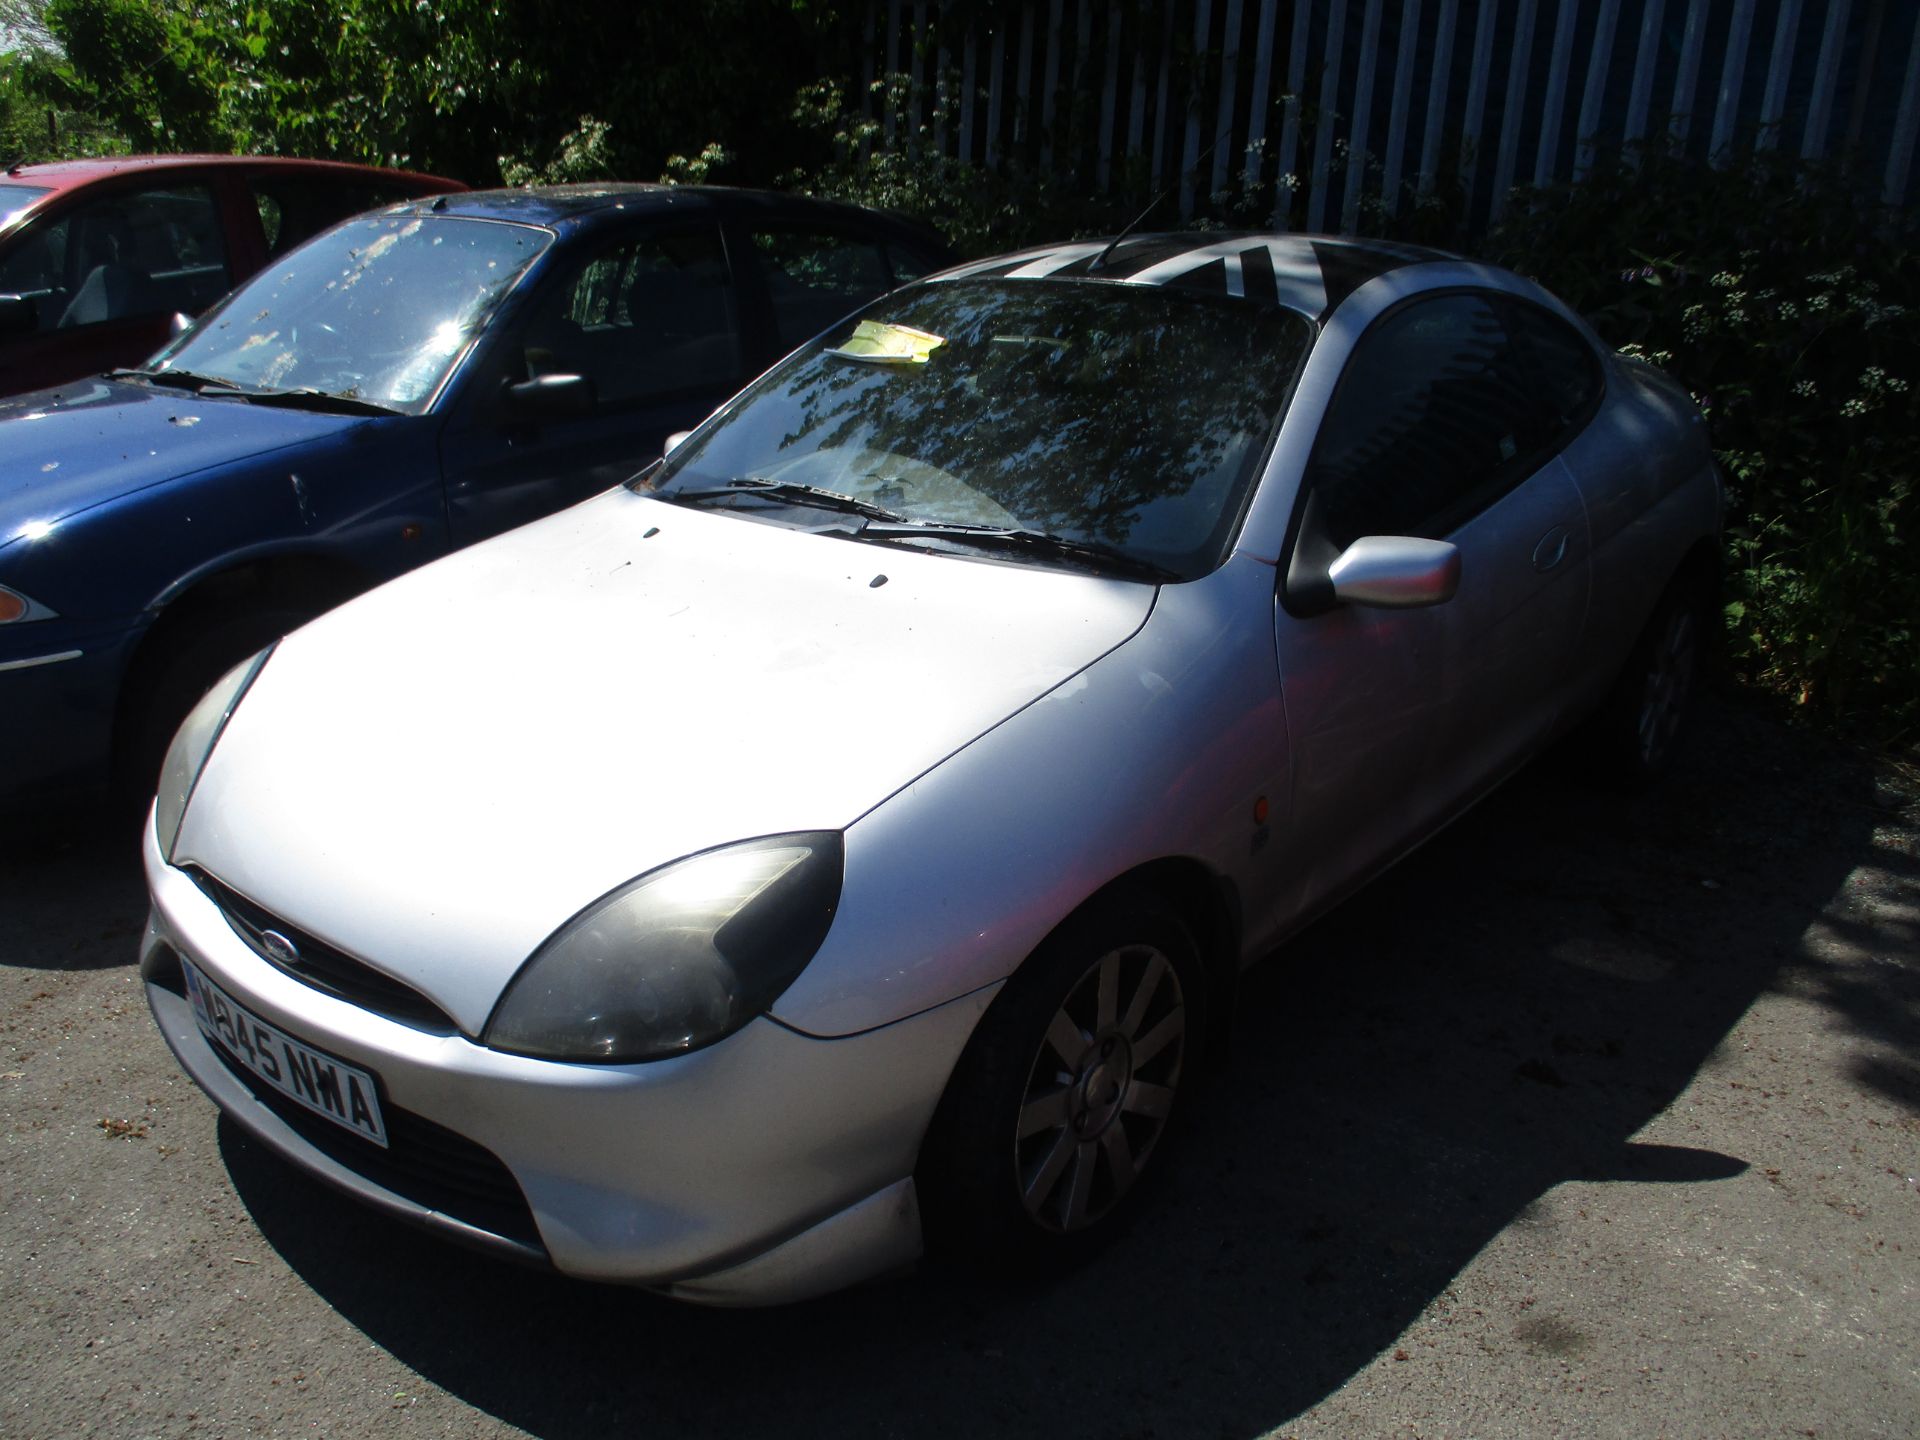 FORD PUMA 1.7L COUPE - petrol - silver - Image 2 of 3